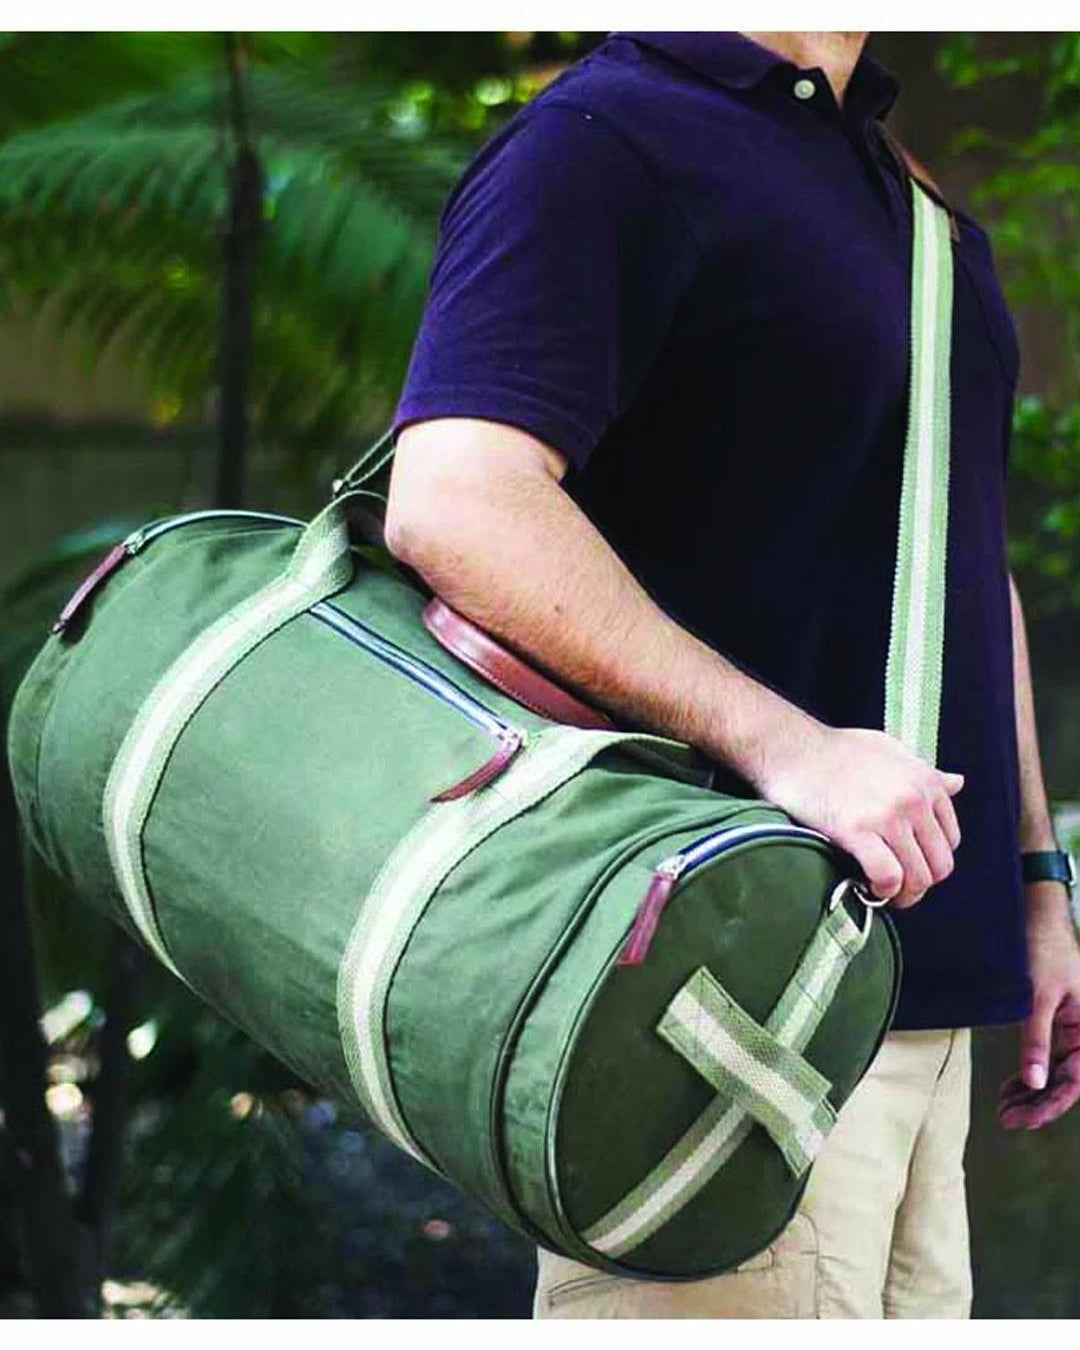 Folk Water Resistant Military Green Duffle Bag - Our Better Planet